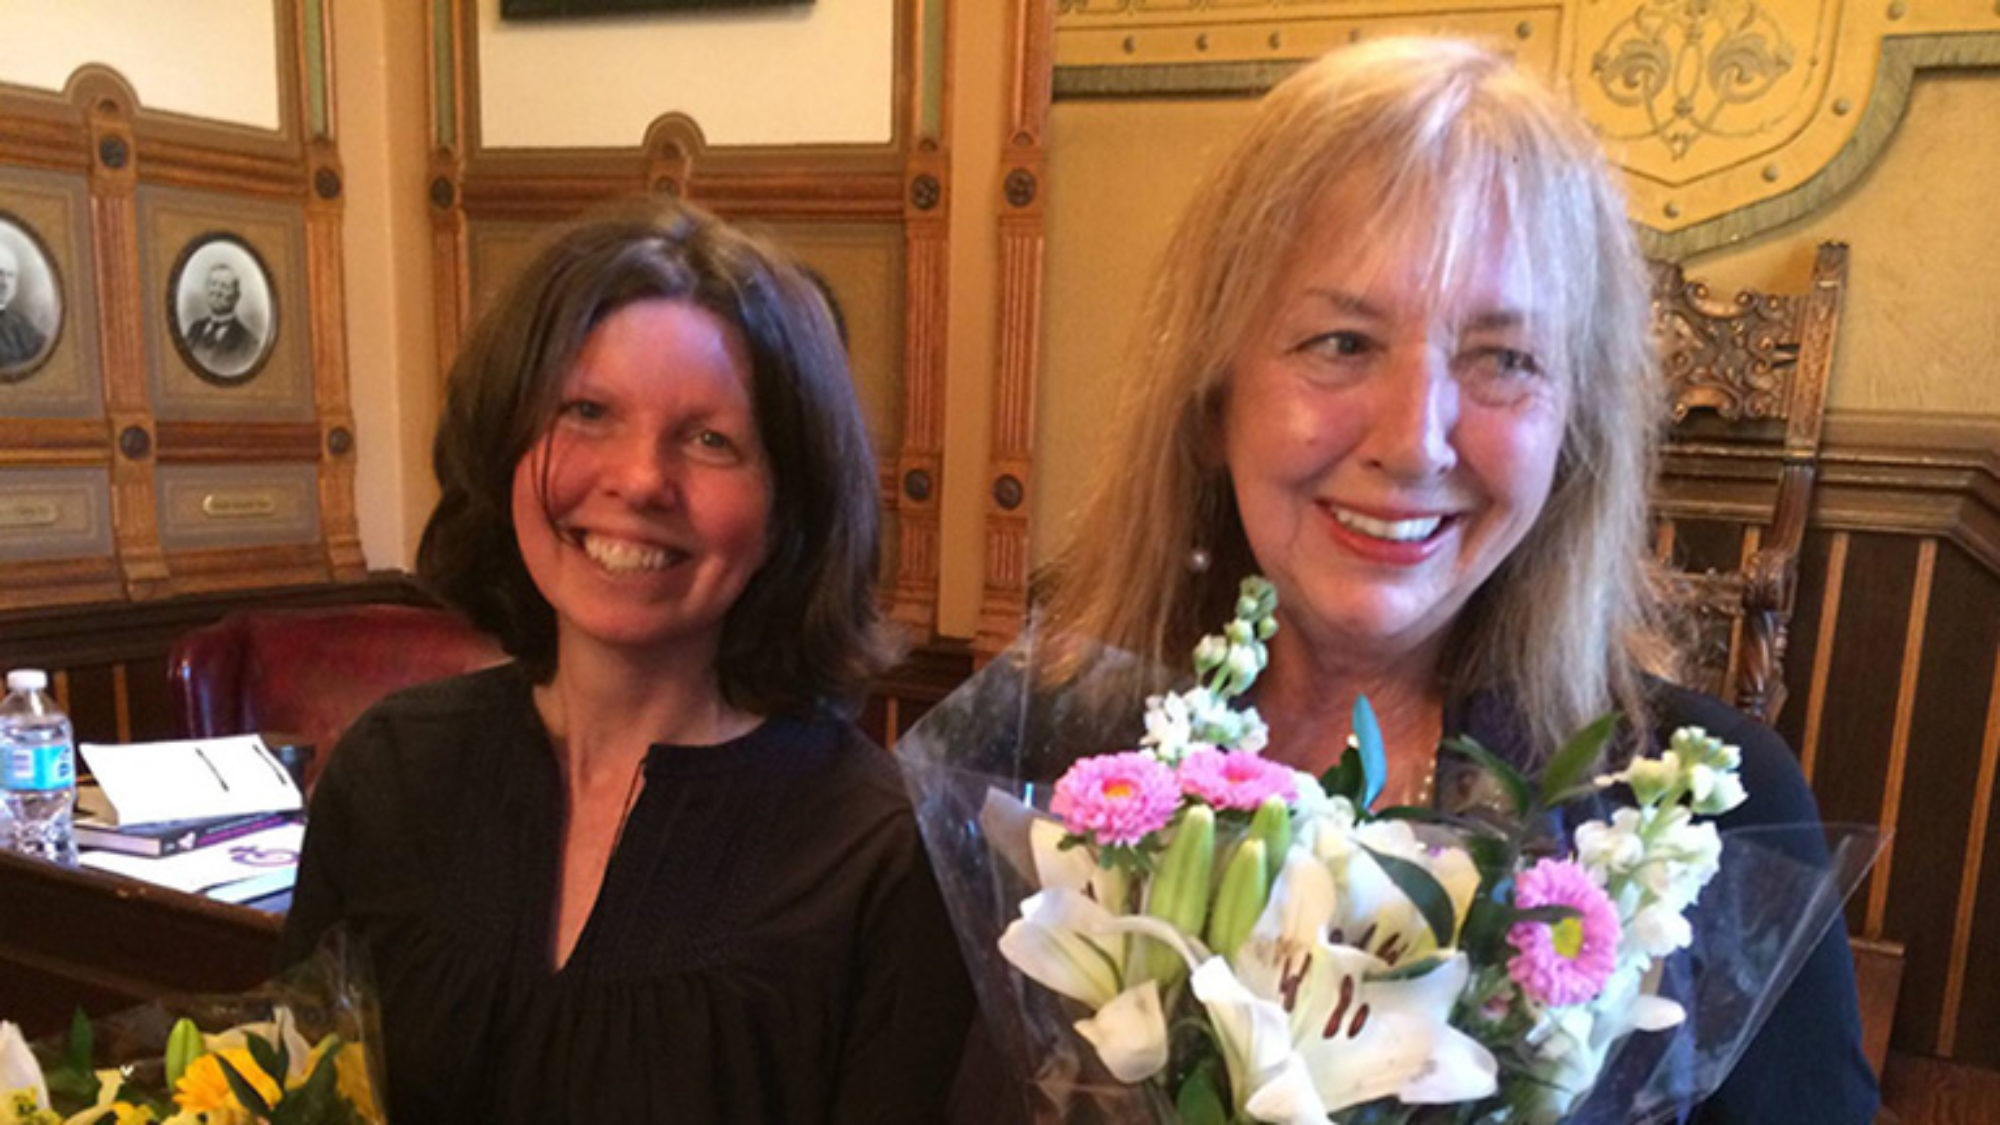 Mary Esselman and Elizabeth Velez with a bouquet of flowers.